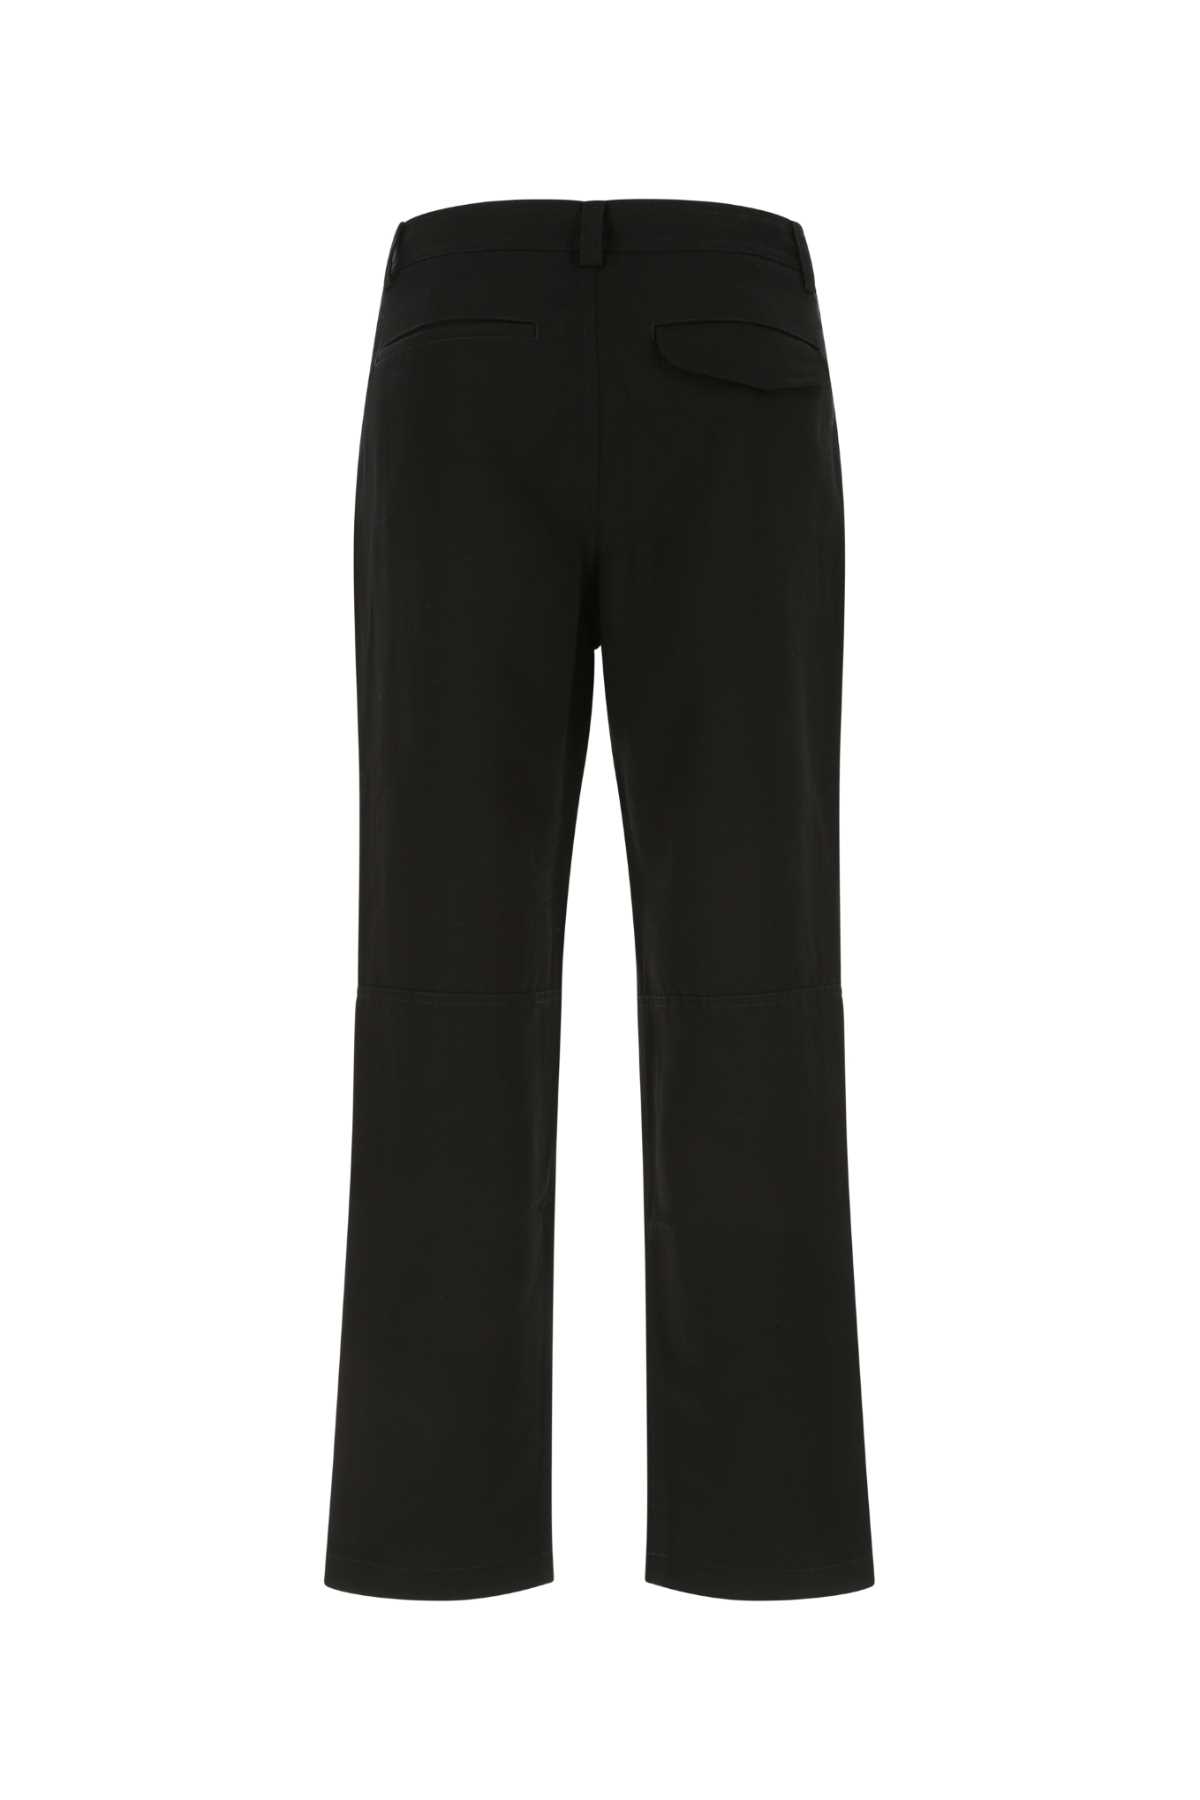 Burberry Black Cotton Blend Pant In A1189